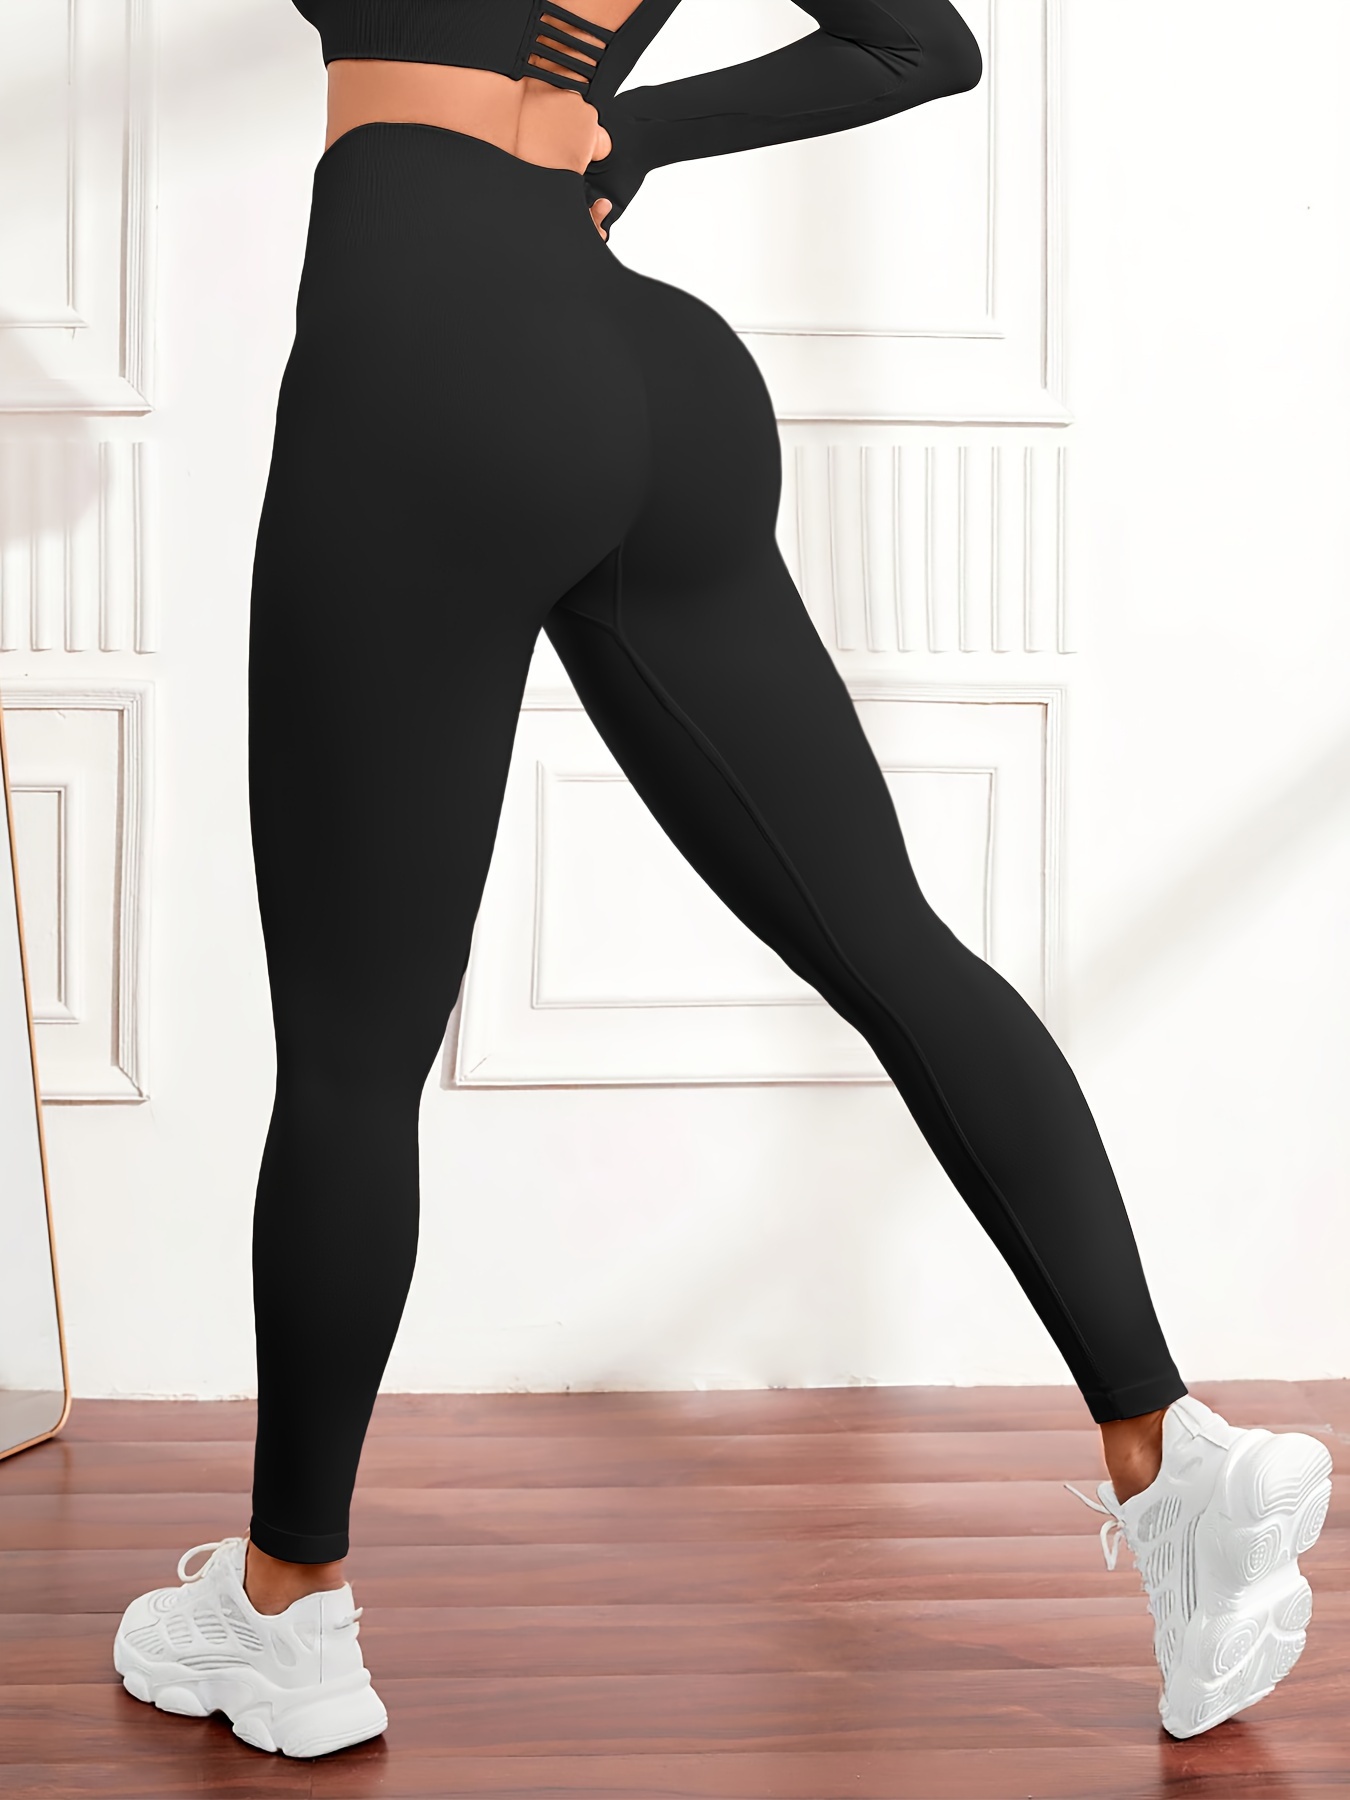 Black Lace Leggings Women Stretch Workout High Waisted Soft Casual